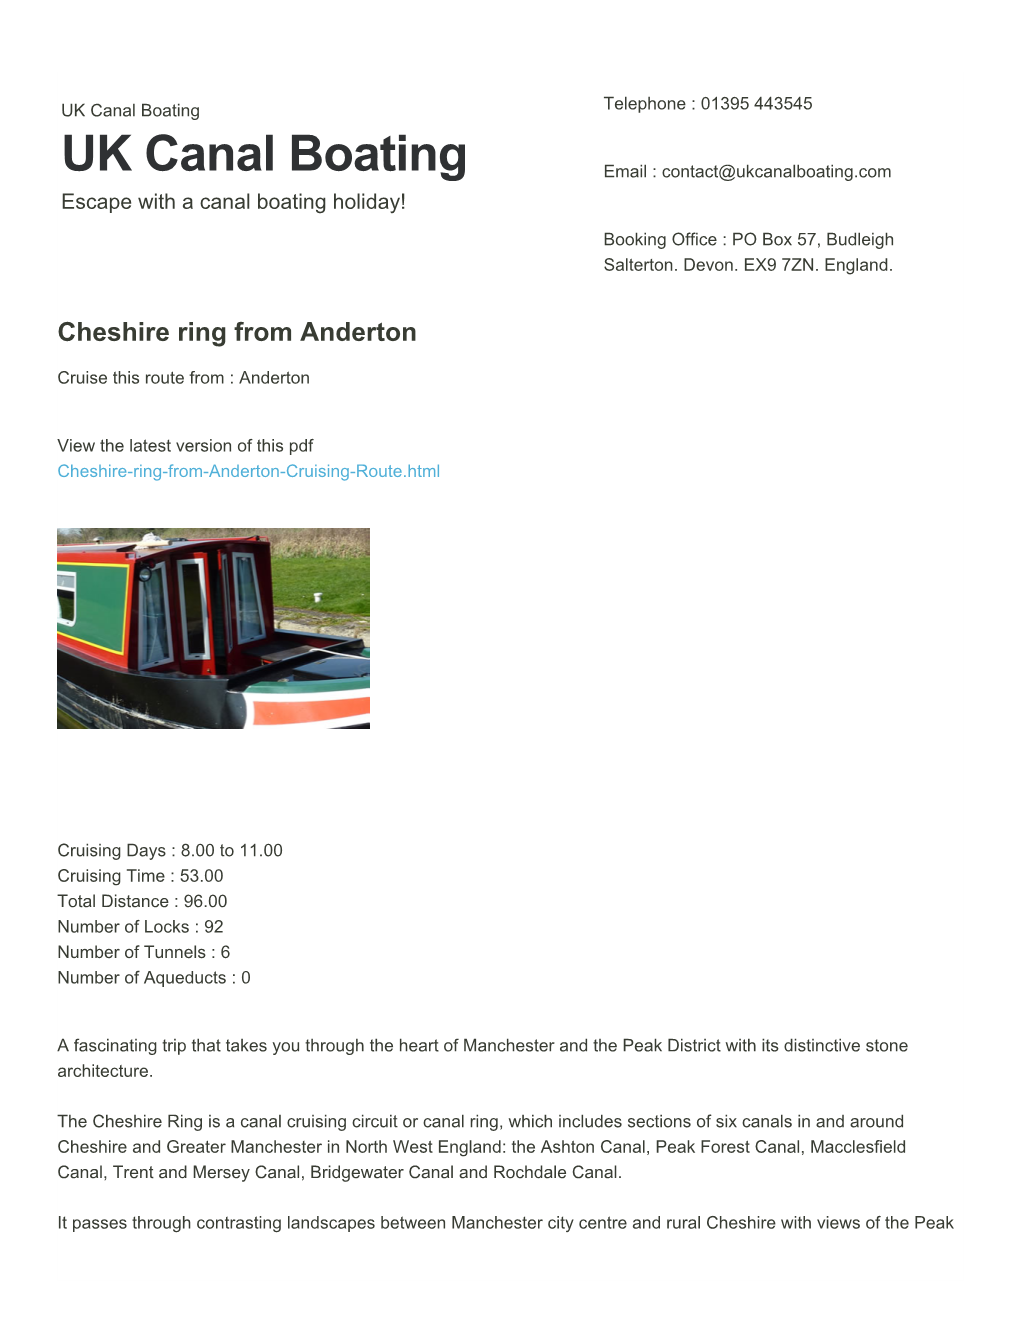 Cheshire Ring from Anderton | UK Canal Boating